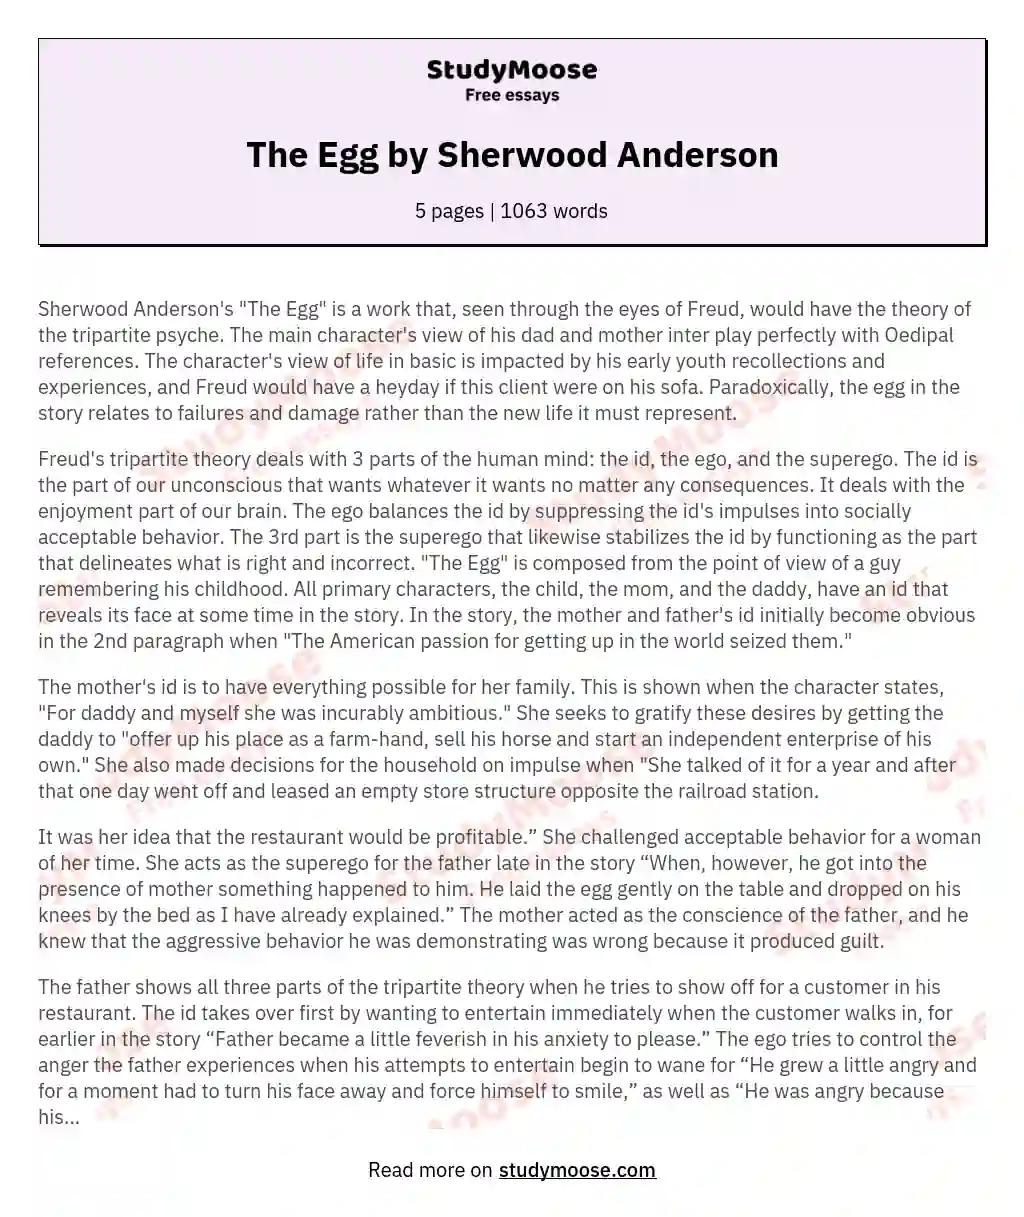 The Egg by Sherwood Anderson